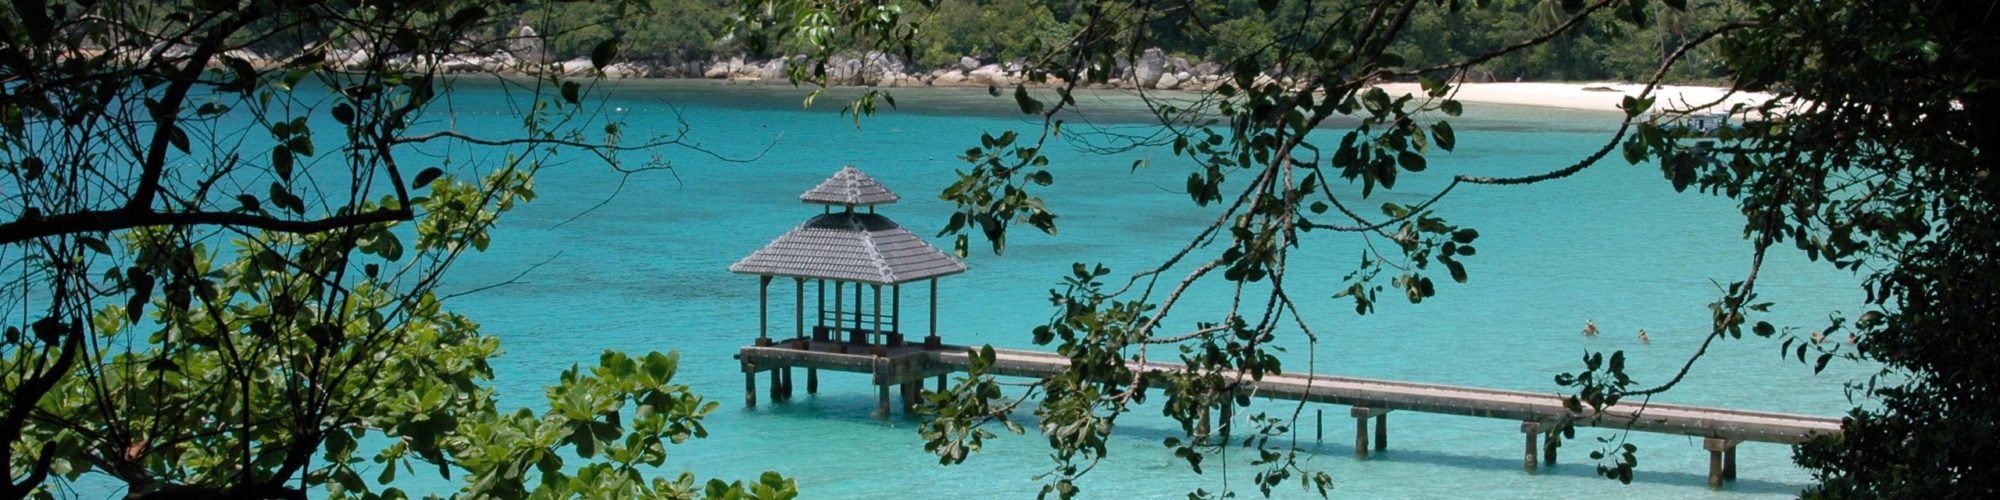 Tioman Is travel agents packages deals